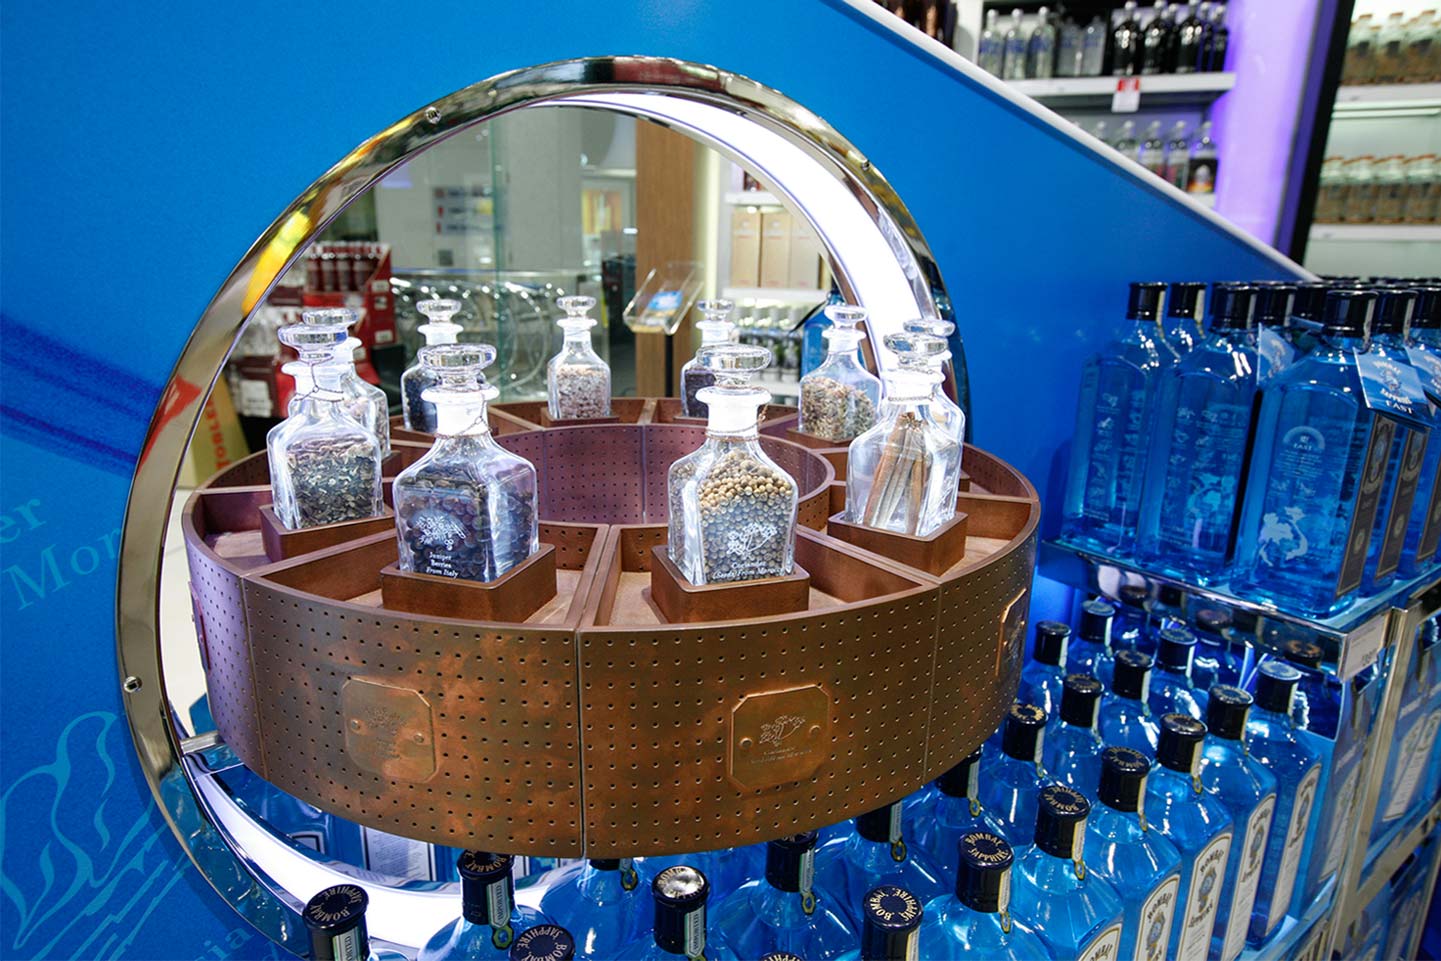 Detail of Bombay Sapphire visual merchandising display Sydney Airport designed by CampbellRigg